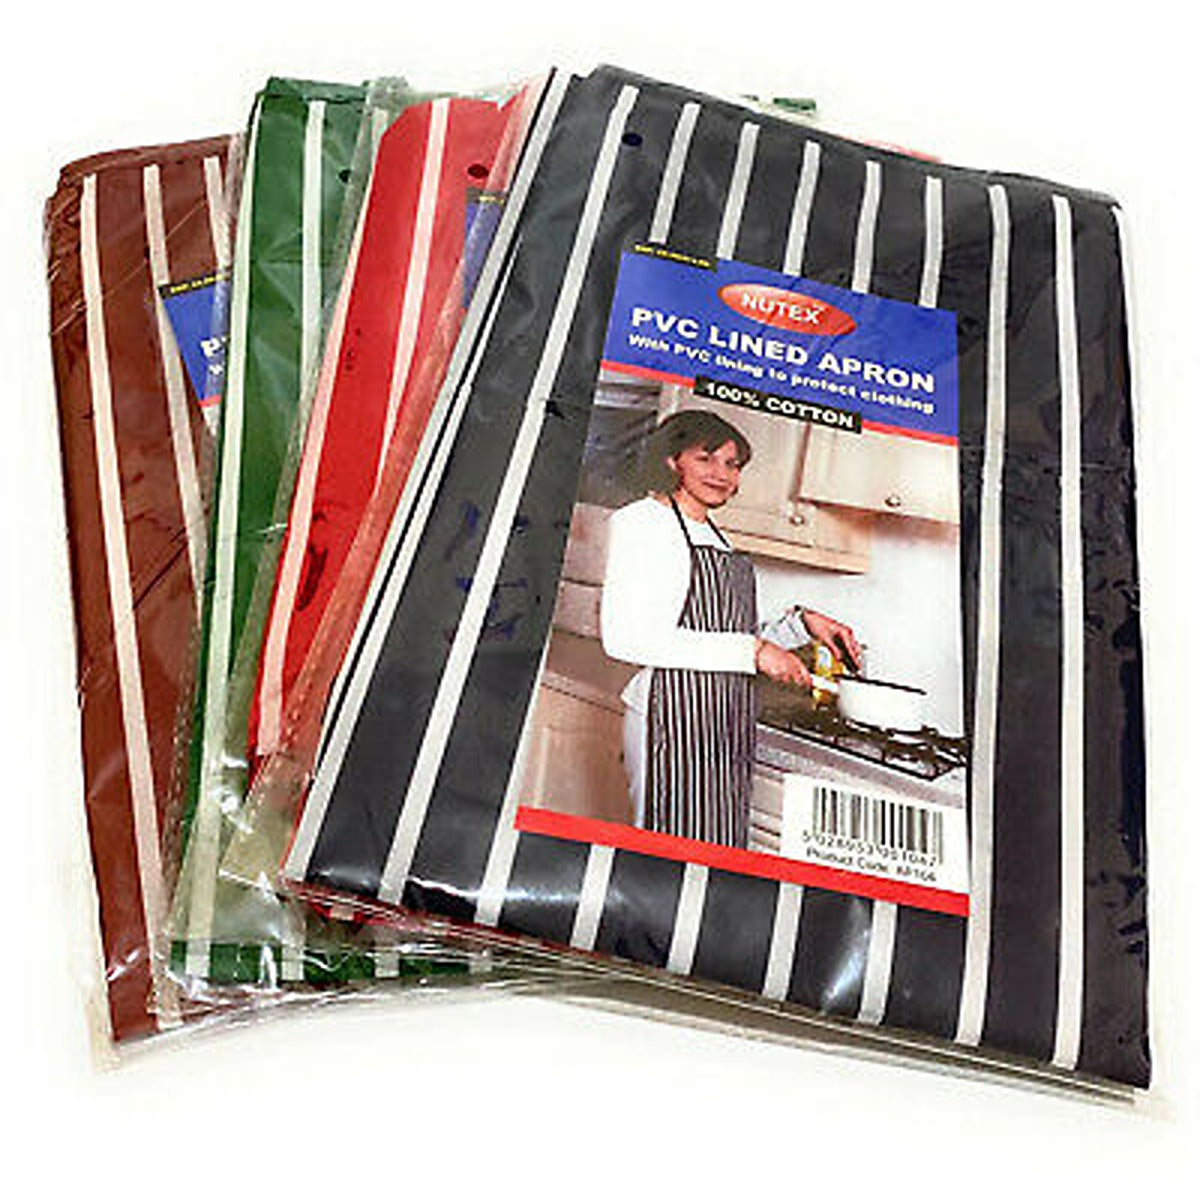 Packaged Nutex PVC lined chef aprons in various colors.